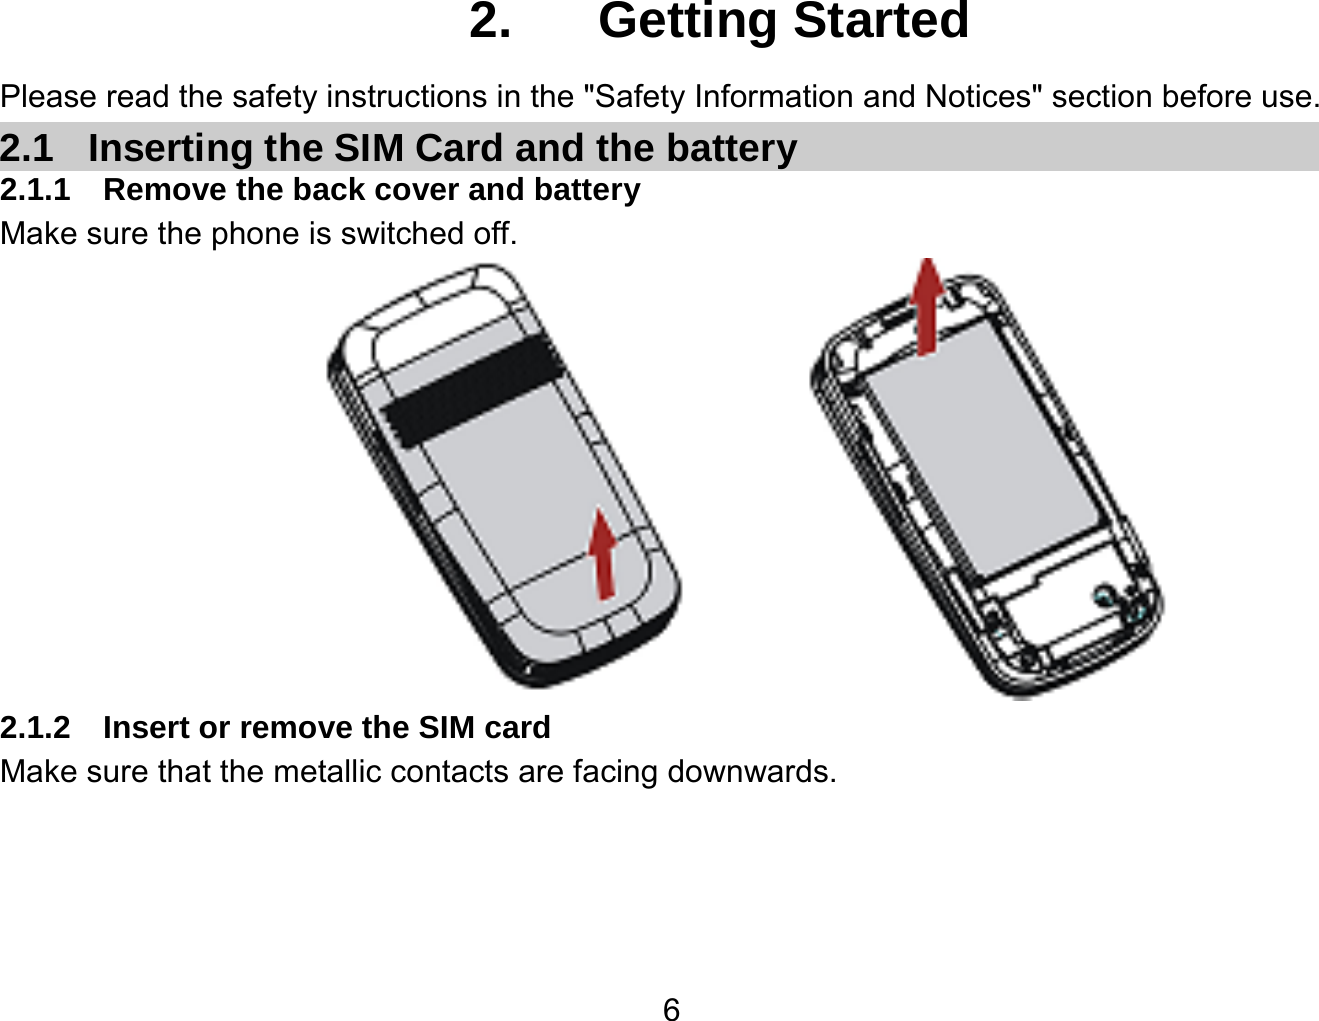   62.  Getting Started Please read the safety instructions in the &quot;Safety Information and Notices&quot; section before use. 2.1  Inserting the SIM Card and the battery 2.1.1  Remove the back cover and battery Make sure the phone is switched off.  2.1.2  Insert or remove the SIM card Make sure that the metallic contacts are facing downwards. 